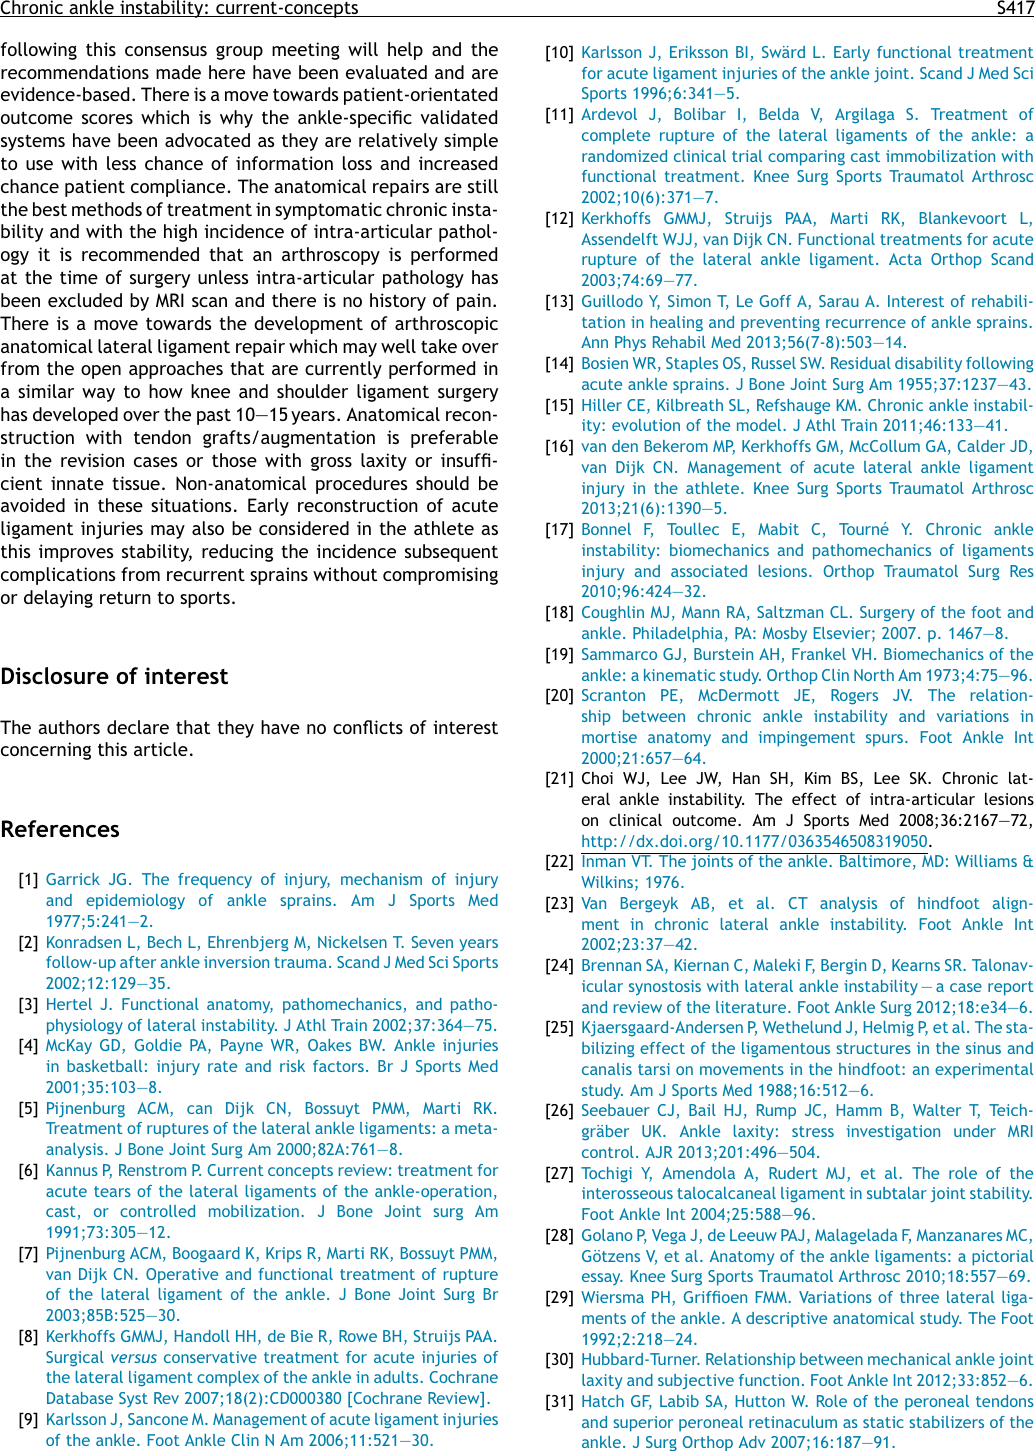 Page 7 of 9 - Consensus In Chronic Ankle Instability  OTSR CAI 20131